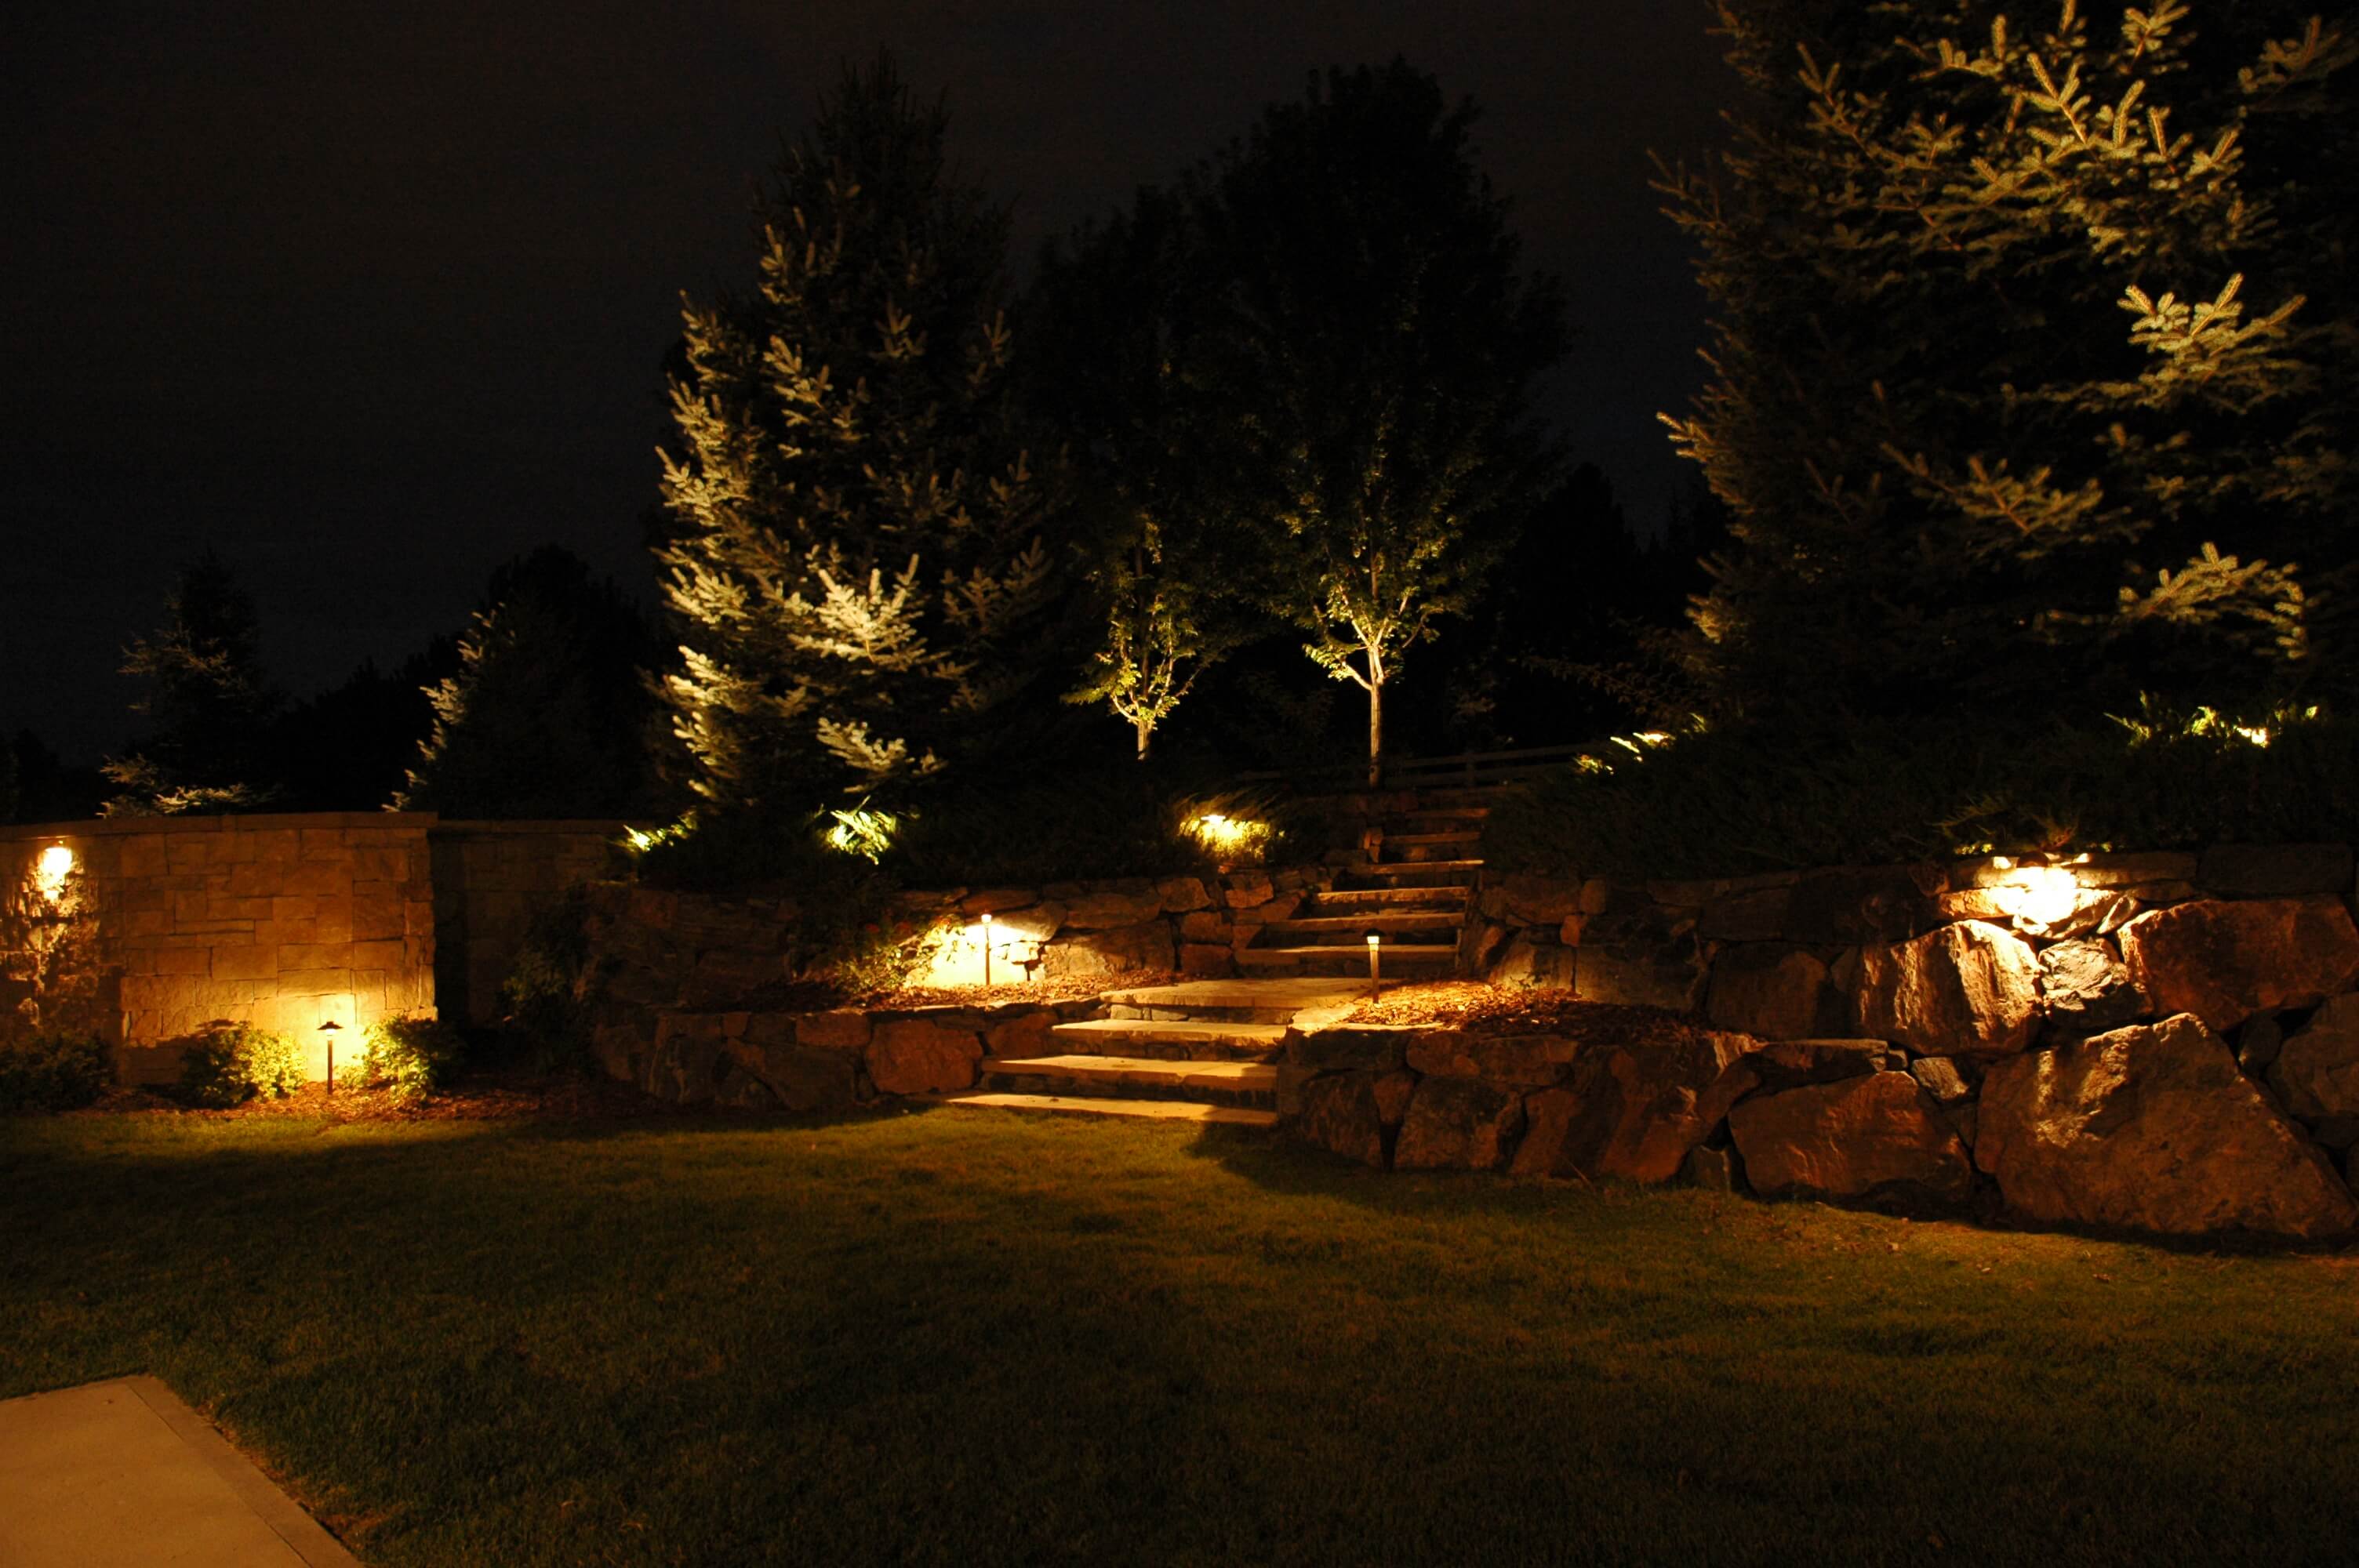 Lighted rock walls and trees